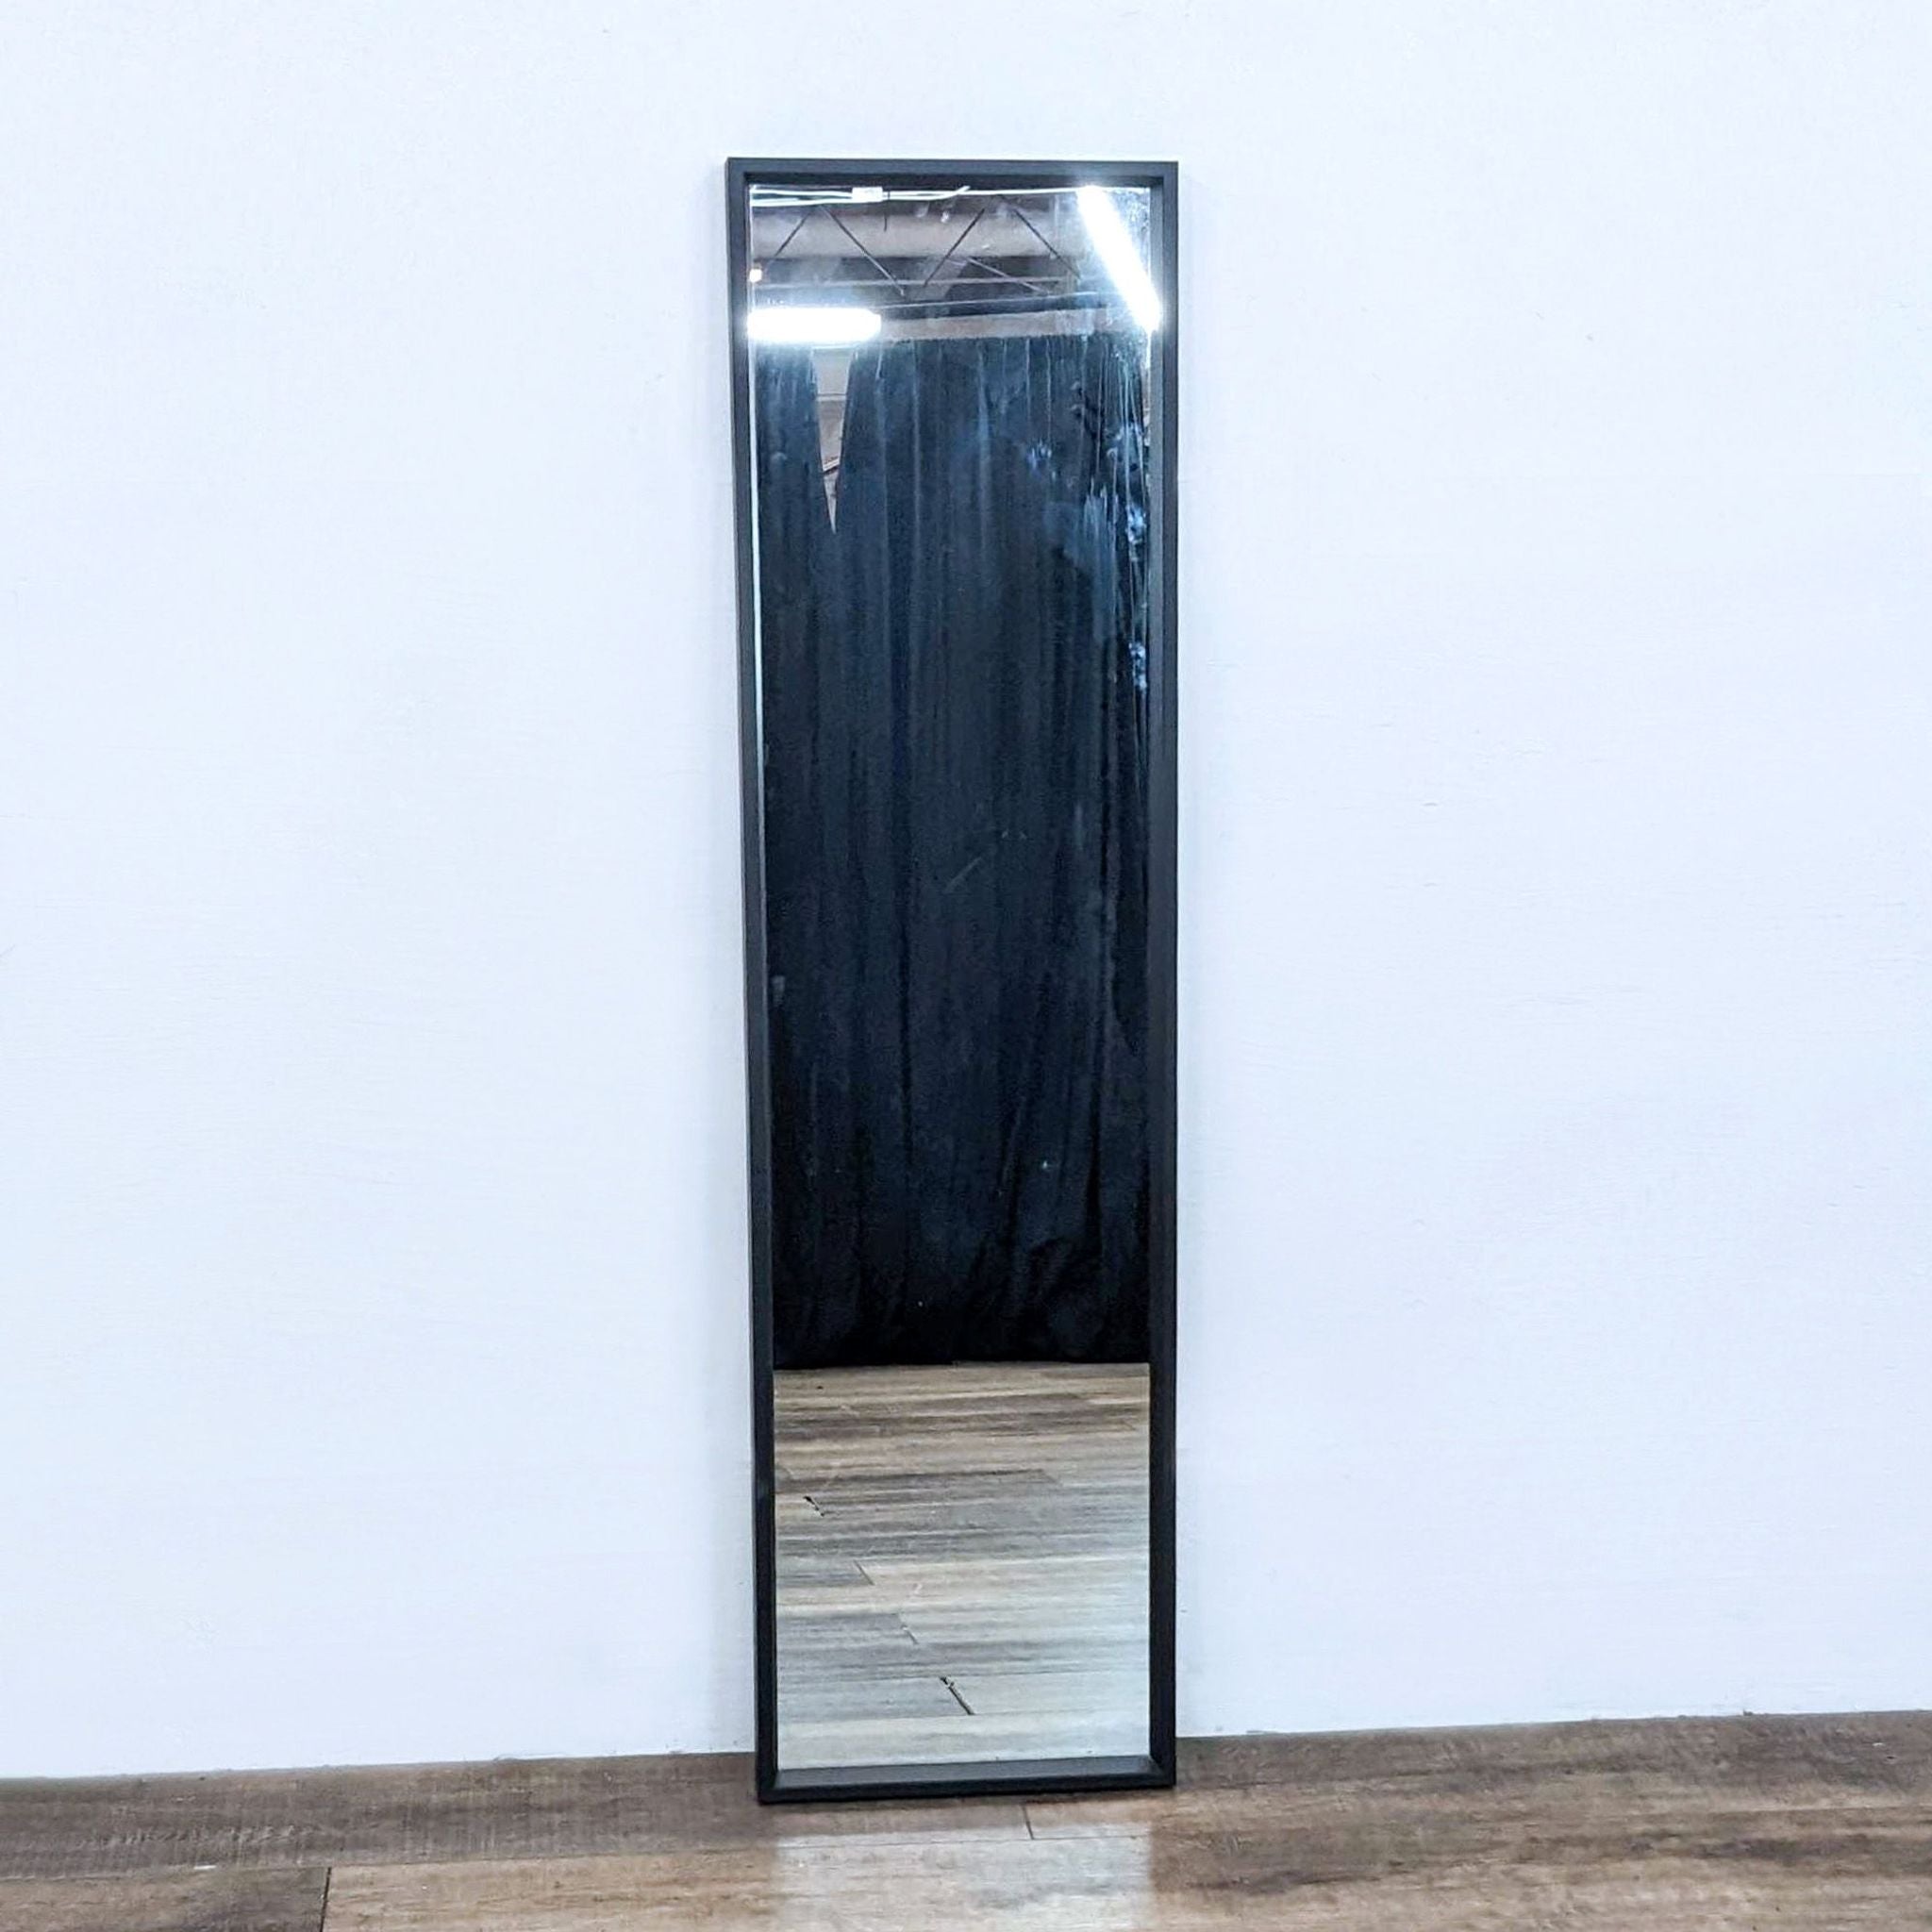 Ikea Nissdal long mirror, vertical position, with black frame against a white wall on wooden flooring.